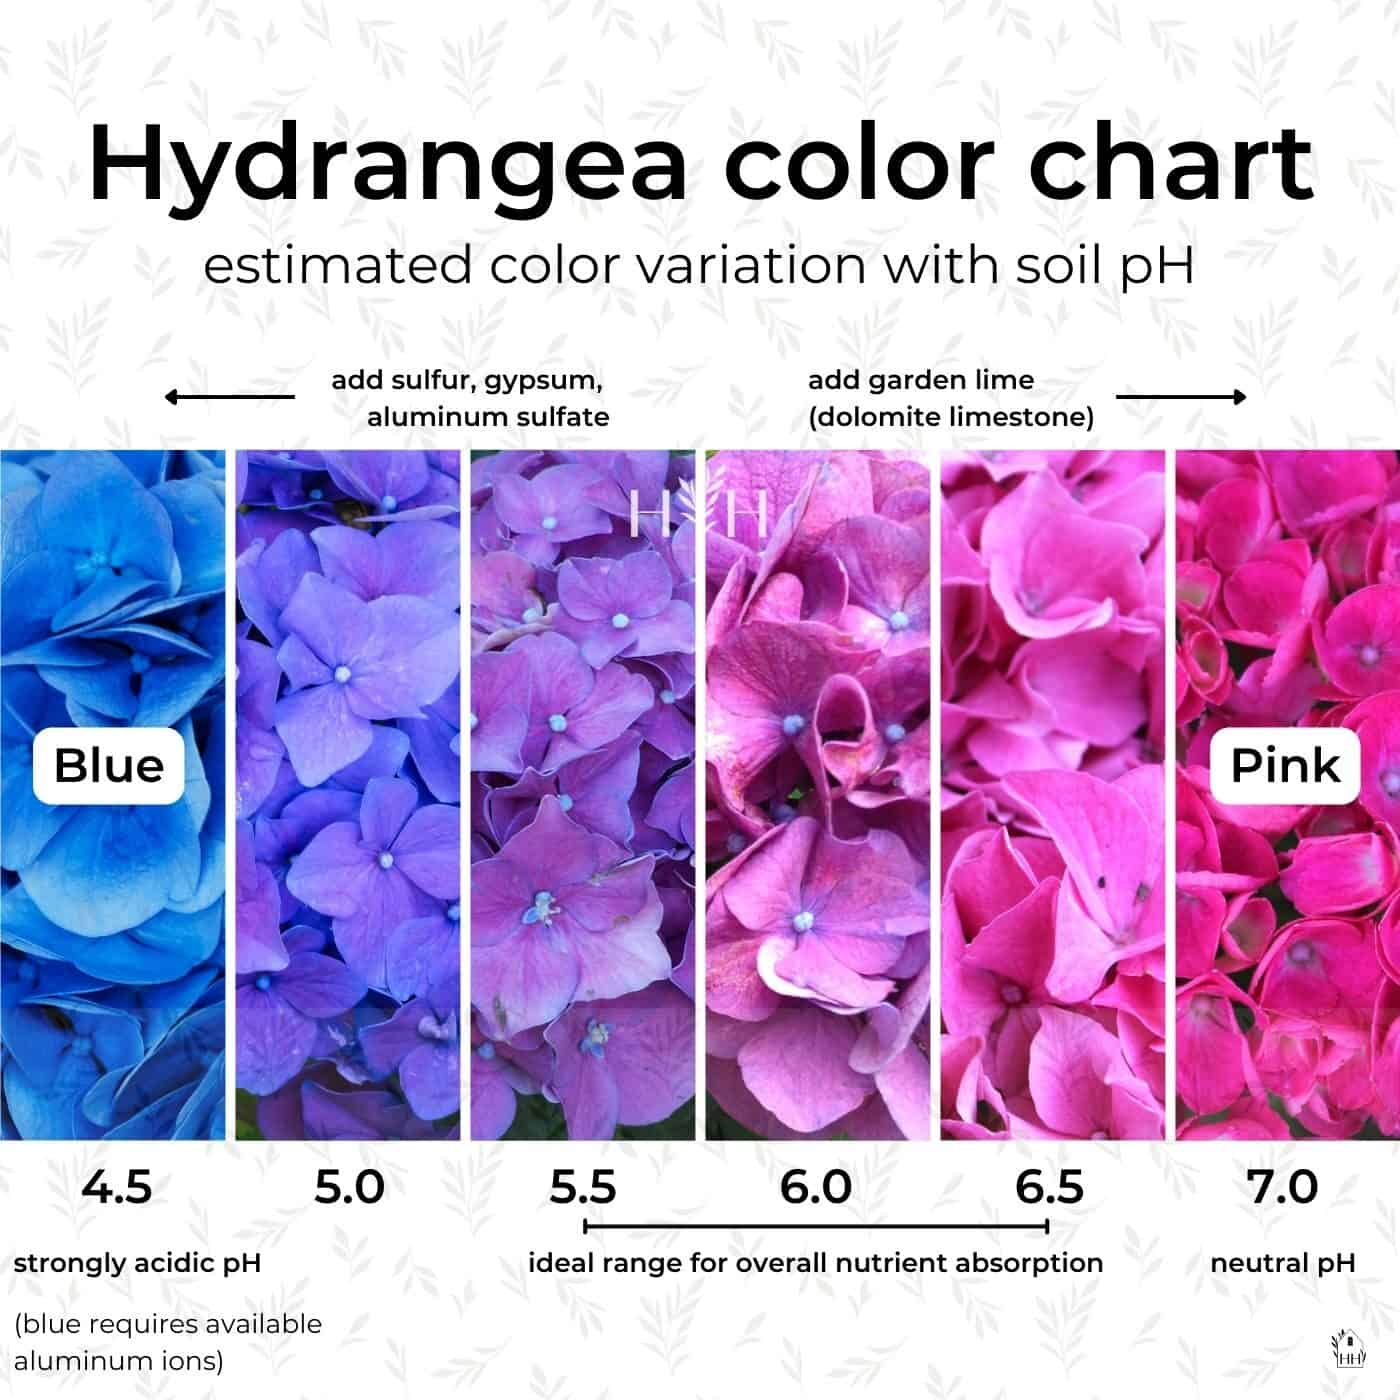 Hydrangea color chart - home for the harvest - gardening website